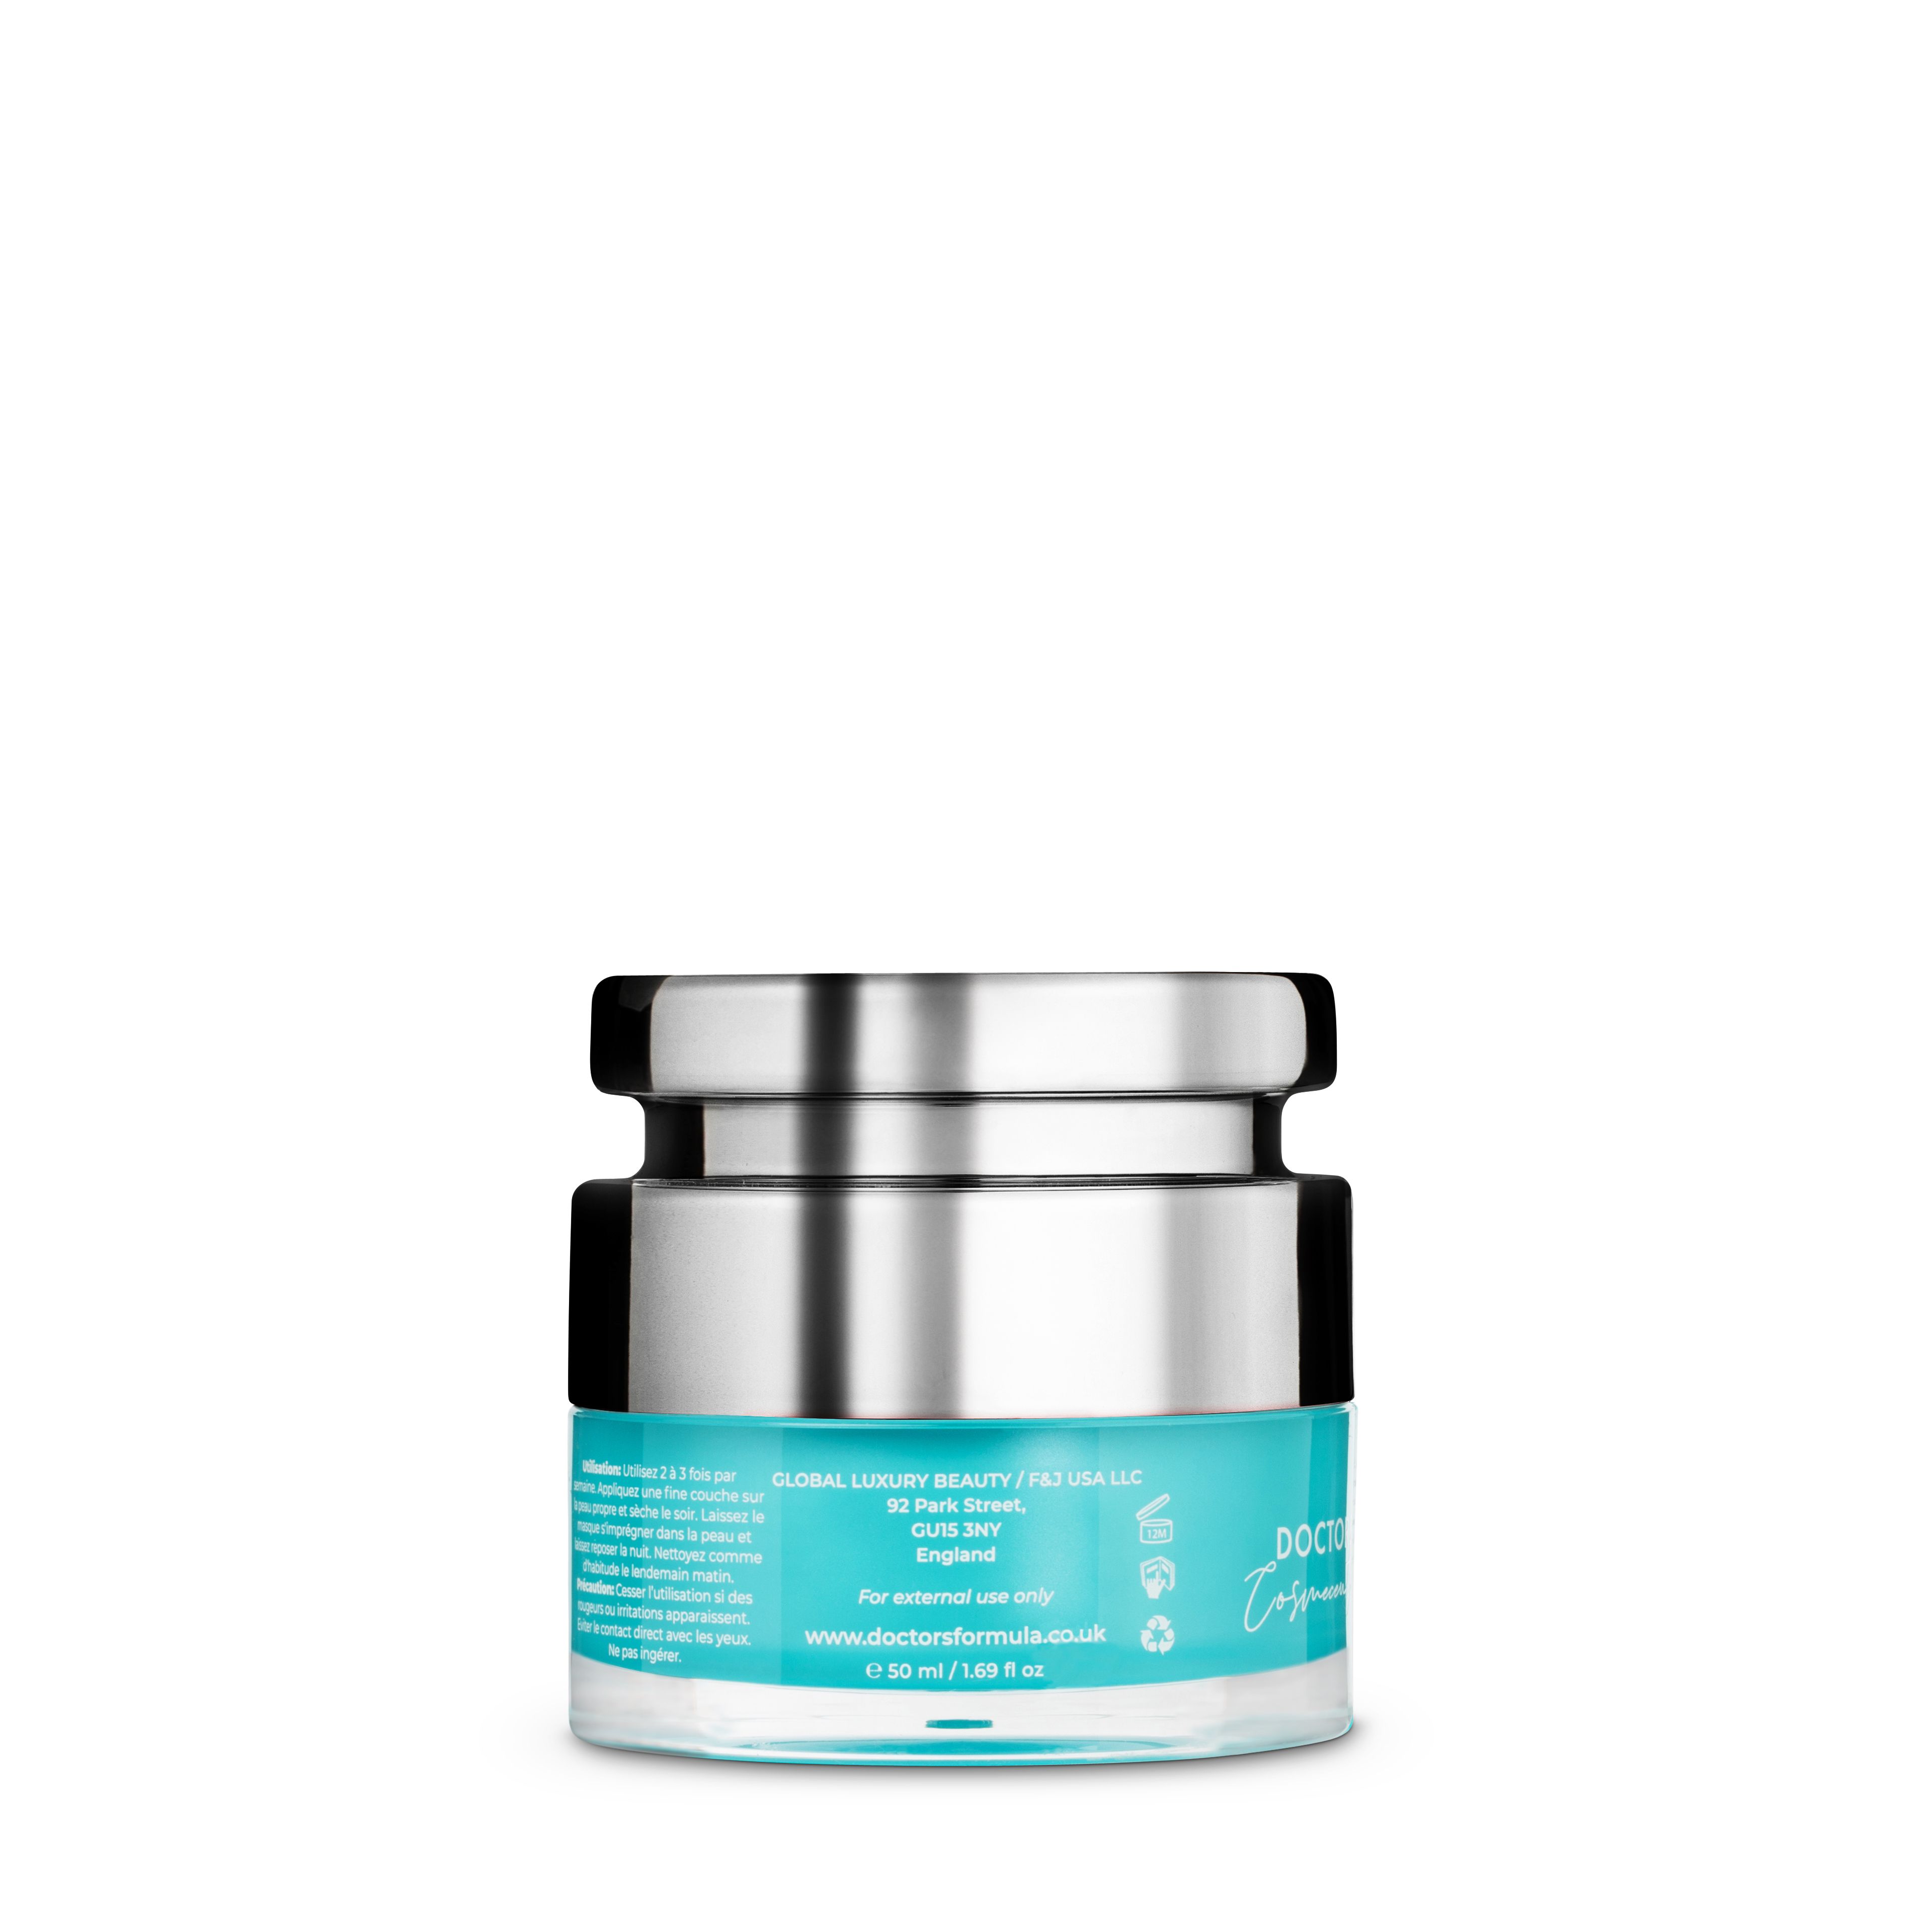 Our 8 Hour Deep Repair Mask is overnight miracle mask for dry, tired looking skin. 
It contains complex of collagen ingredients that nourish, hydrate and smoothen the skin for a radiant  and youthful complexion.

Key Ingredients:
- The soluble collagen balances, nourishes and moisturises the skin.
- The Active Mineral Complex improves the moisture levels of skin.

Usage:
Apply a thin layer onto the skin after cleansing,avoiding the delicate eye area. Leave for 5-10 minutes and wash off. For best results, use 2-3 times per week.

100% Cruelty Free